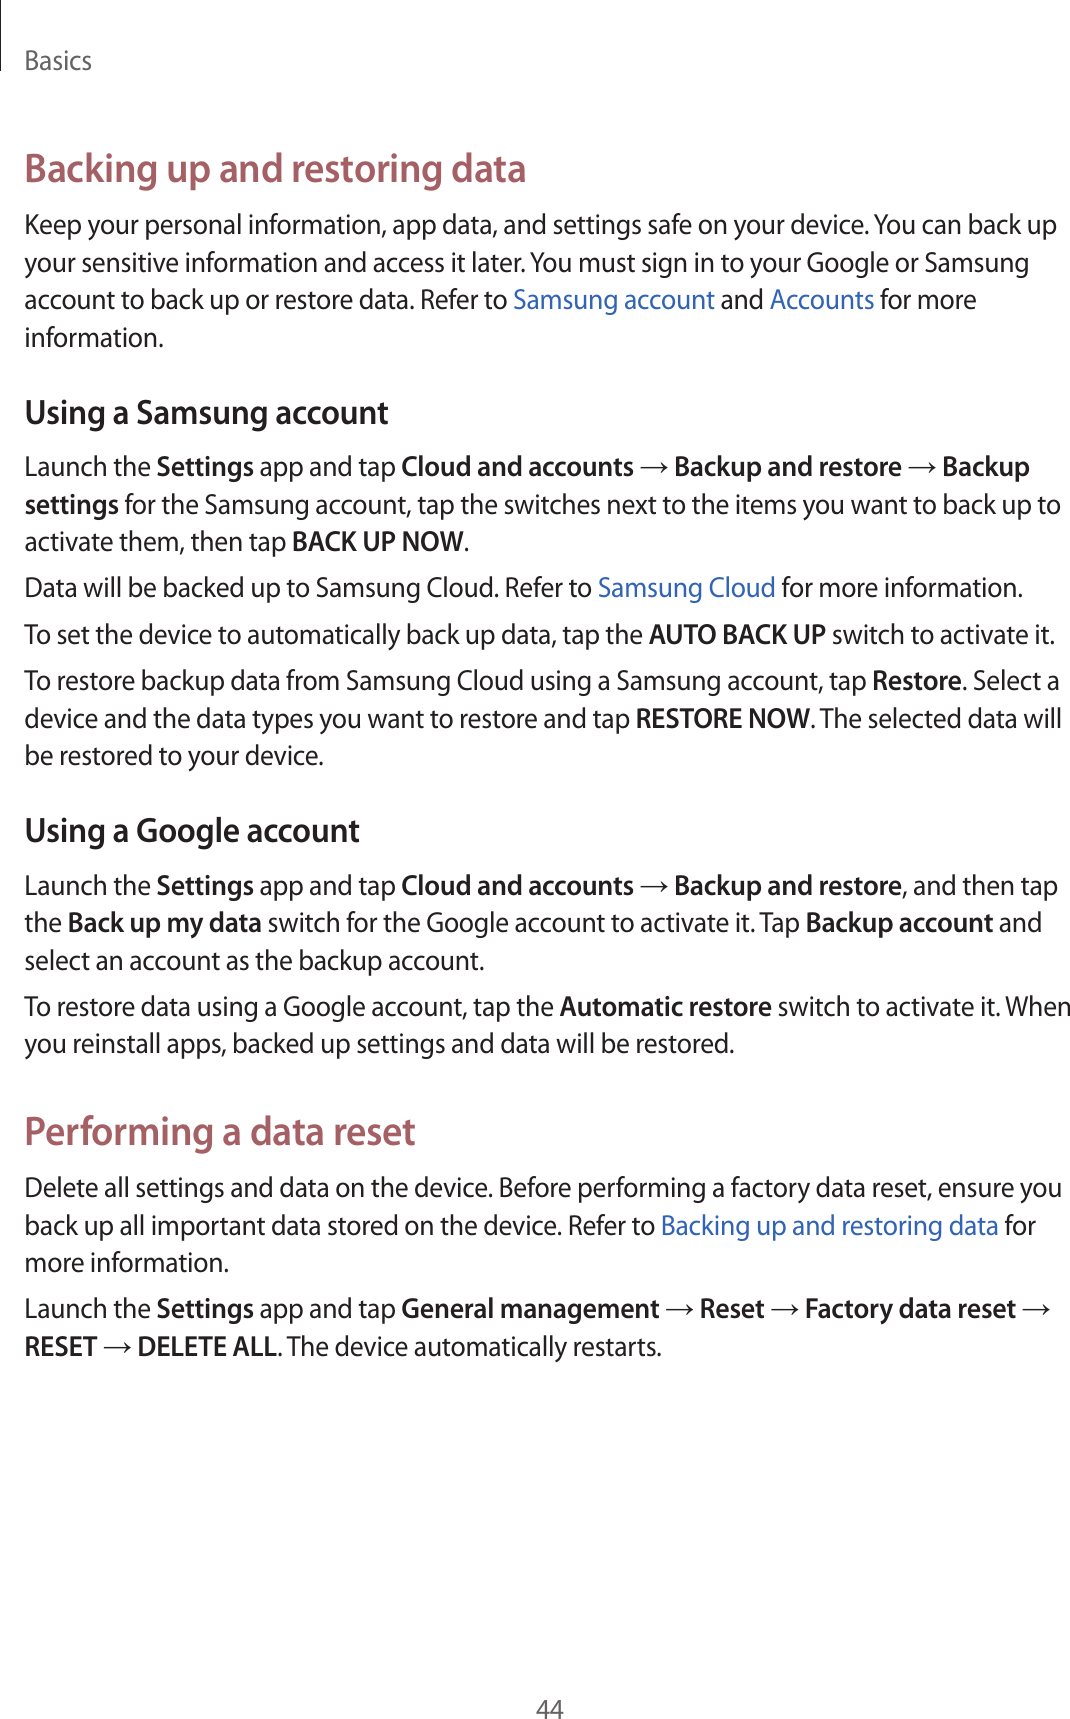 Basics44Backing up and restoring dataKeep your personal information, app data, and settings safe on your device. You can back up your sensitive information and access it later. You must sign in to your Google or Samsung account to back up or restore data. Refer to Samsung account and Accounts for more information.Using a Samsung accountLaunch the Settings app and tap Cloud and accounts → Backup and restore → Backup settings for the Samsung account, tap the switches next to the items you want to back up to activate them, then tap BACK UP NOW.Data will be backed up to Samsung Cloud. Refer to Samsung Cloud for more information.To set the device to automatically back up data, tap the AUTO BACK UP switch to activate it.To restore backup data from Samsung Cloud using a Samsung account, tap Restore. Select a device and the data types you want to restore and tap RESTORE NOW. The selected data will be restored to your device.Using a Google accountLaunch the Settings app and tap Cloud and accounts → Backup and restore, and then tap the Back up my data switch for the Google account to activate it. Tap Backup account and select an account as the backup account.To restore data using a Google account, tap the Automatic restore switch to activate it. When you reinstall apps, backed up settings and data will be restored.Performing a data resetDelete all settings and data on the device. Before performing a factory data reset, ensure you back up all important data stored on the device. Refer to Backing up and restoring data for more information.Launch the Settings app and tap General management → Reset → Factory data reset → RESET → DELETE ALL. The device automatically restarts.